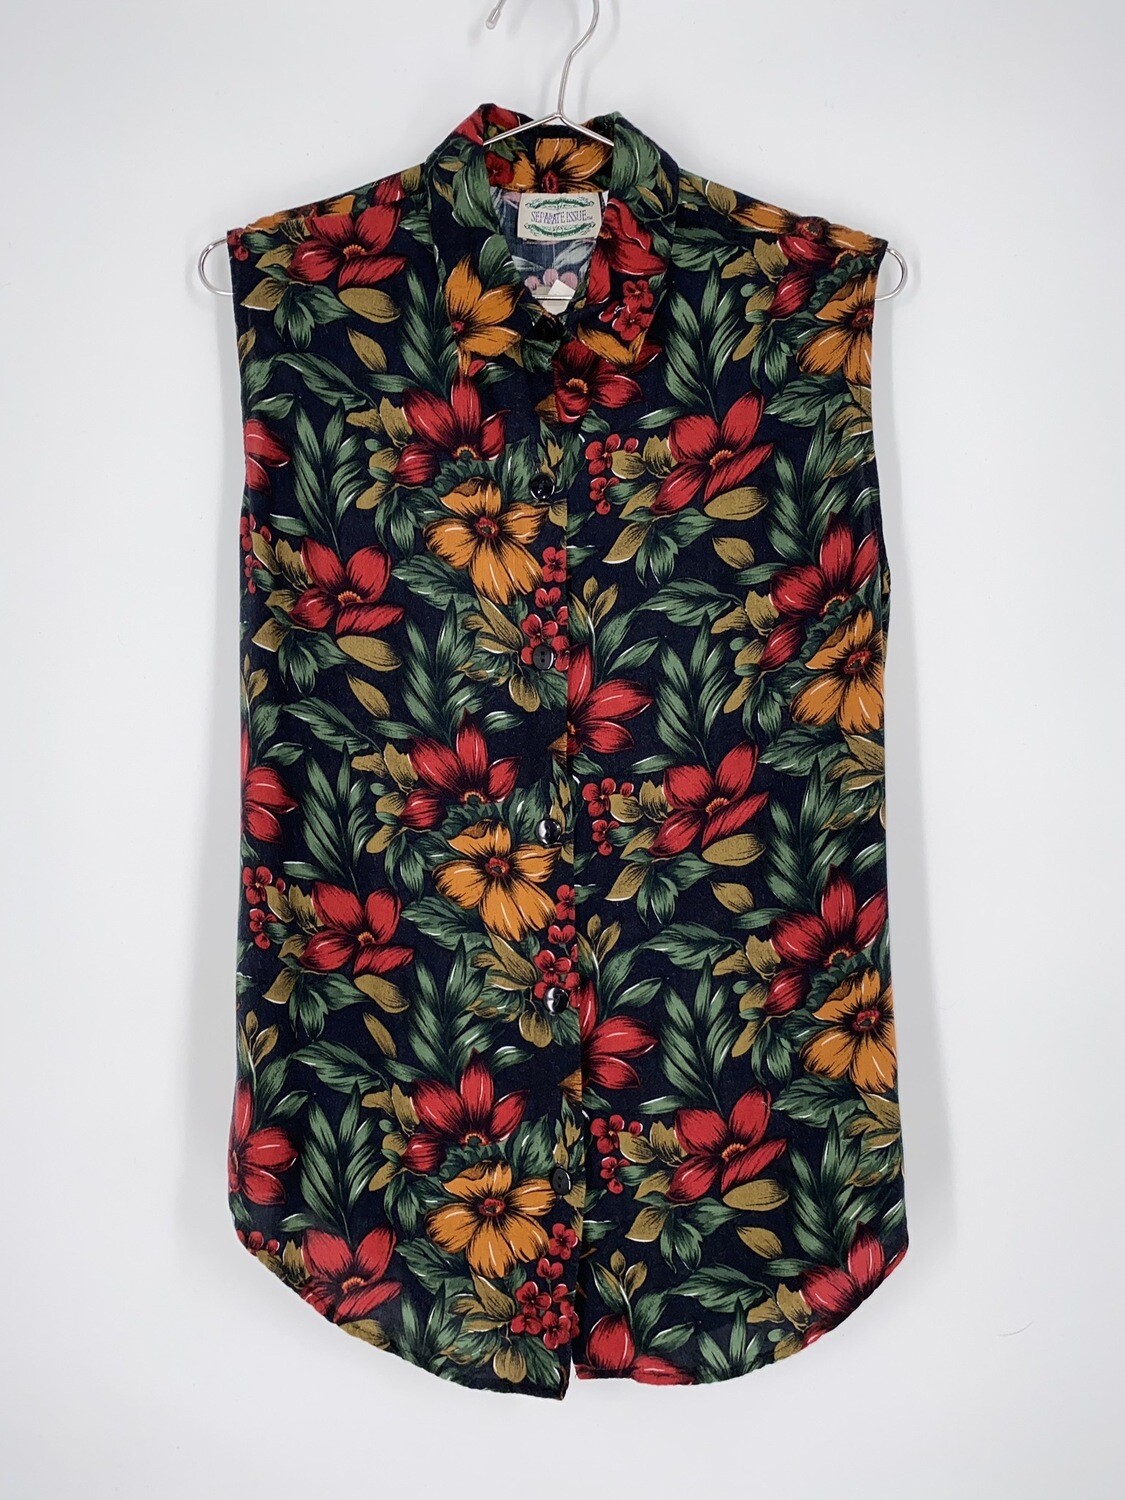 Floral Sleeveless Top Size S